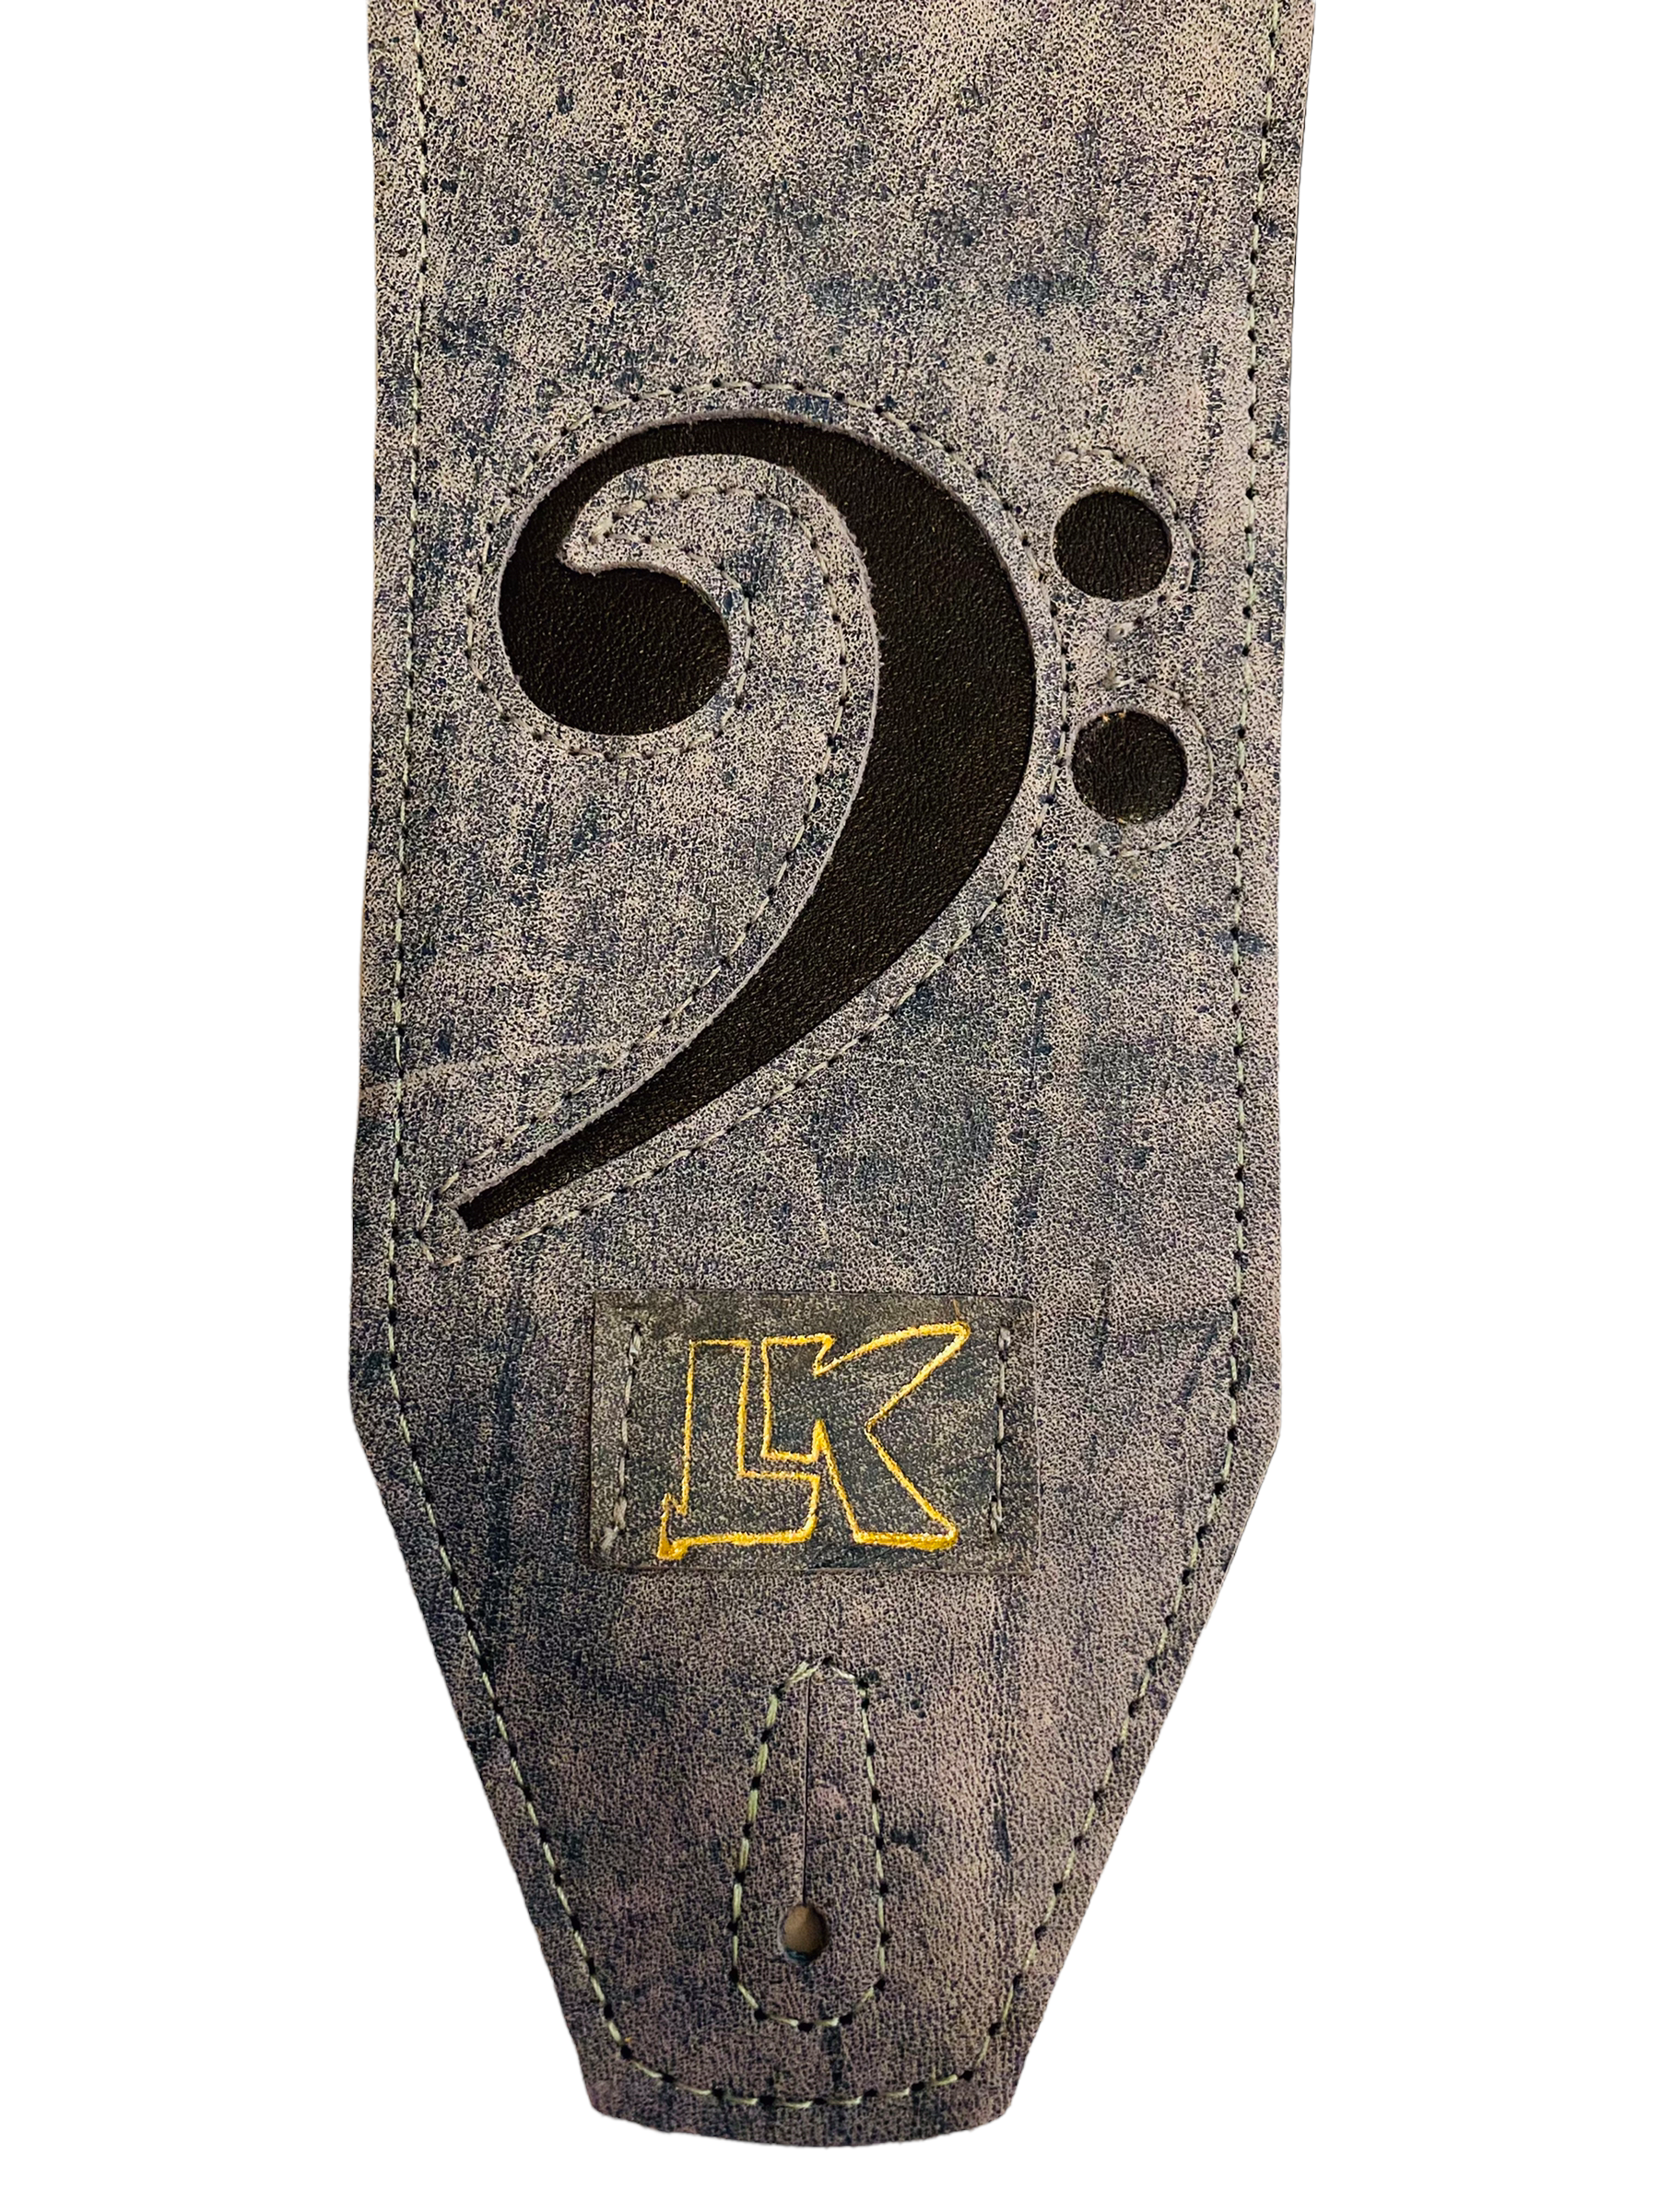 Limited Edition LK 4" Wide F Clef Jeans Strap